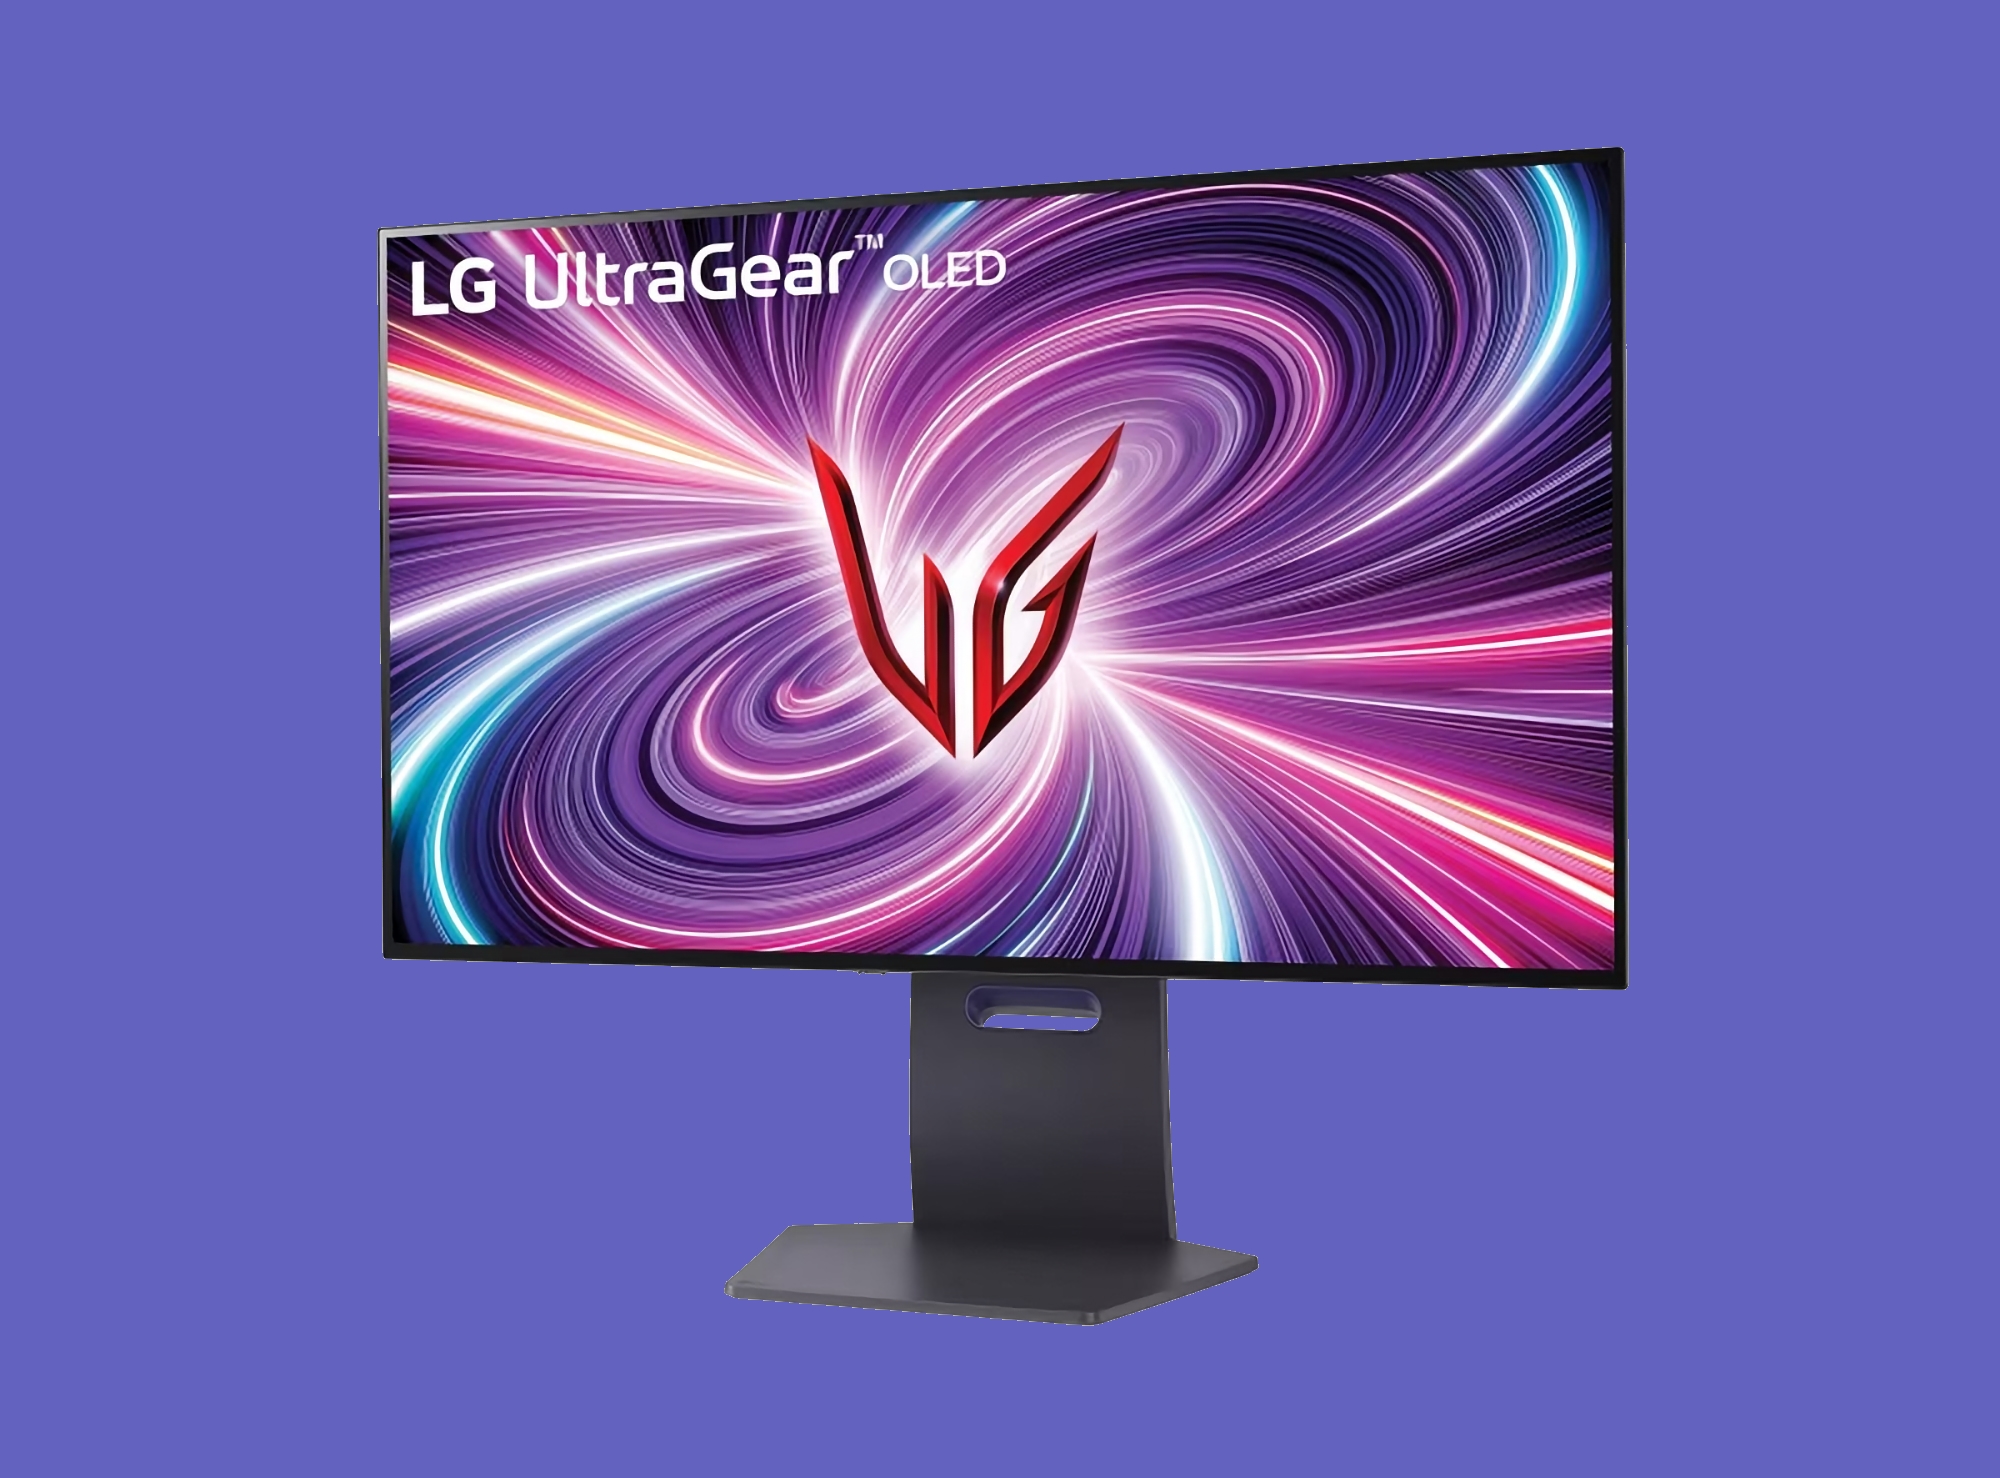 LG has announced new UltraGear gaming monitors with 4K OLED screens and up to 480Hz speeds